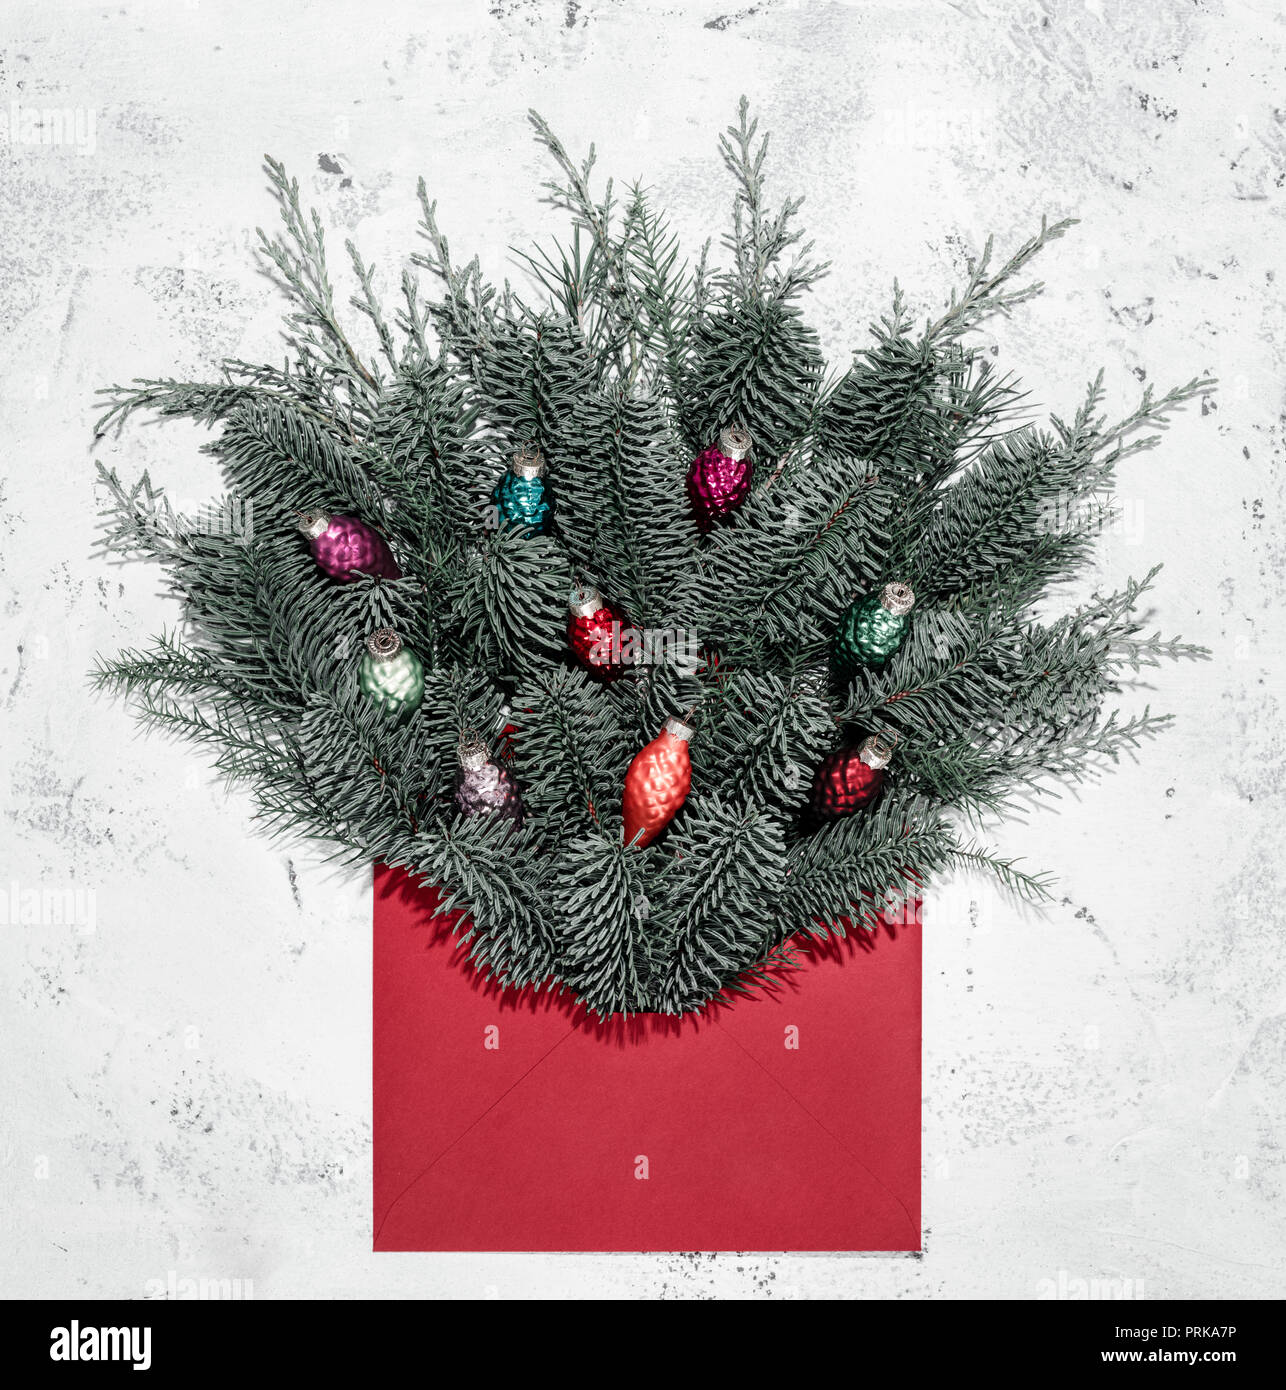 Minimalistic Christmas card mockup with fir branch,bulb, envelope Stock Photo